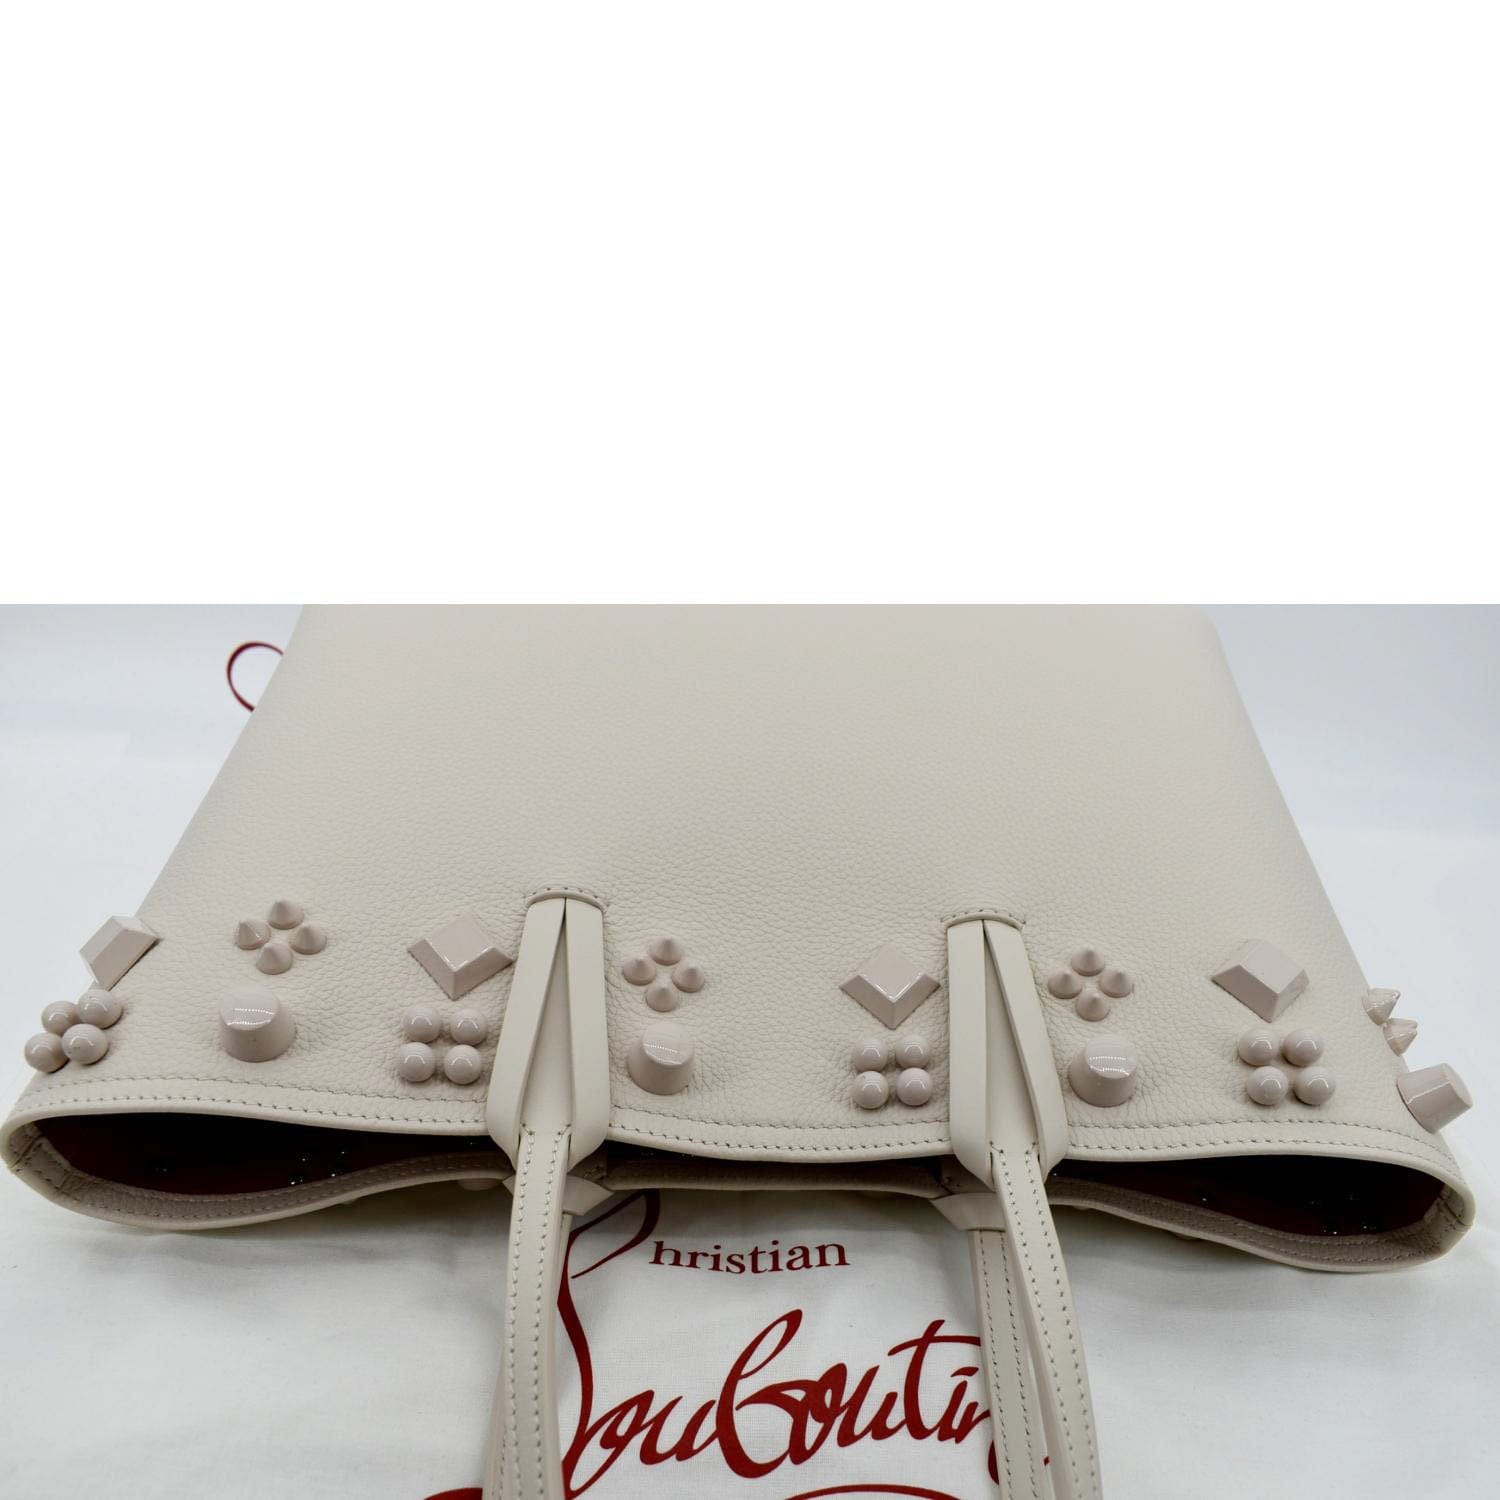 CHRISTIAN LOUBOUTIN Cabata Small Spike Leather Tote Bag Live Beige